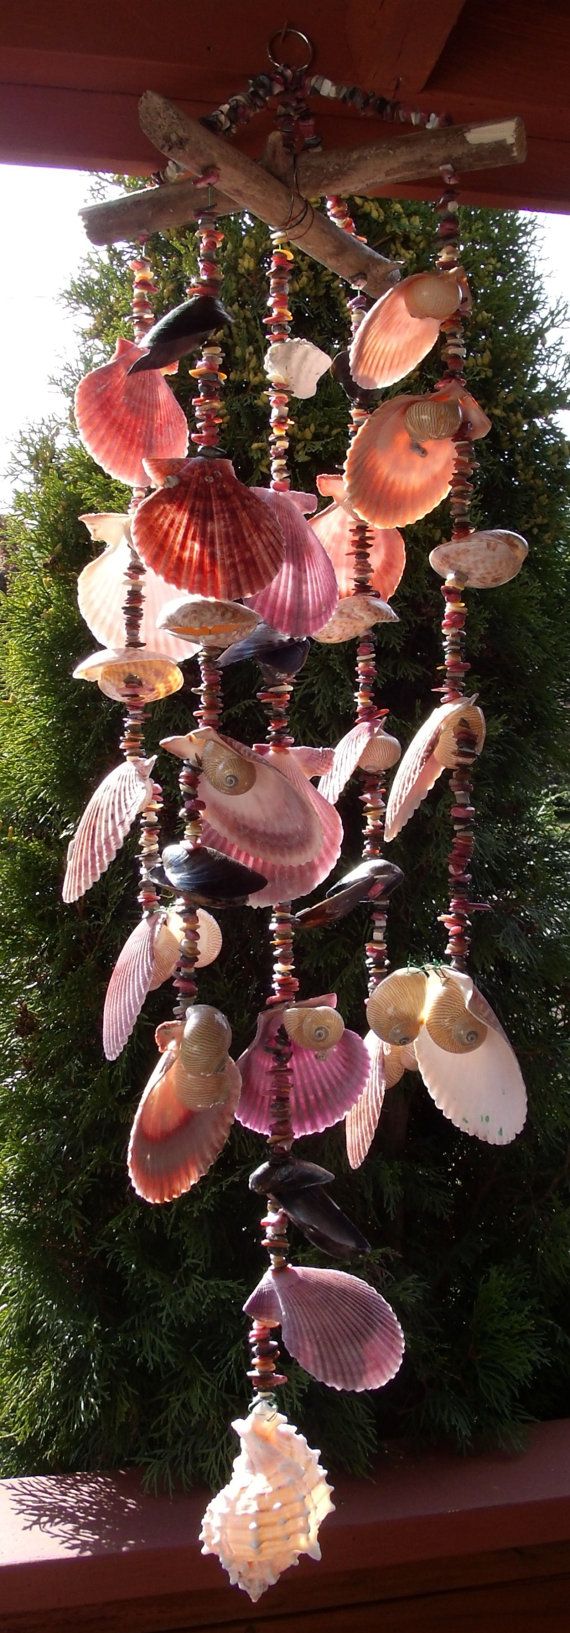 21 sea shell projects to consider on your next walk by the beach 11.jpg